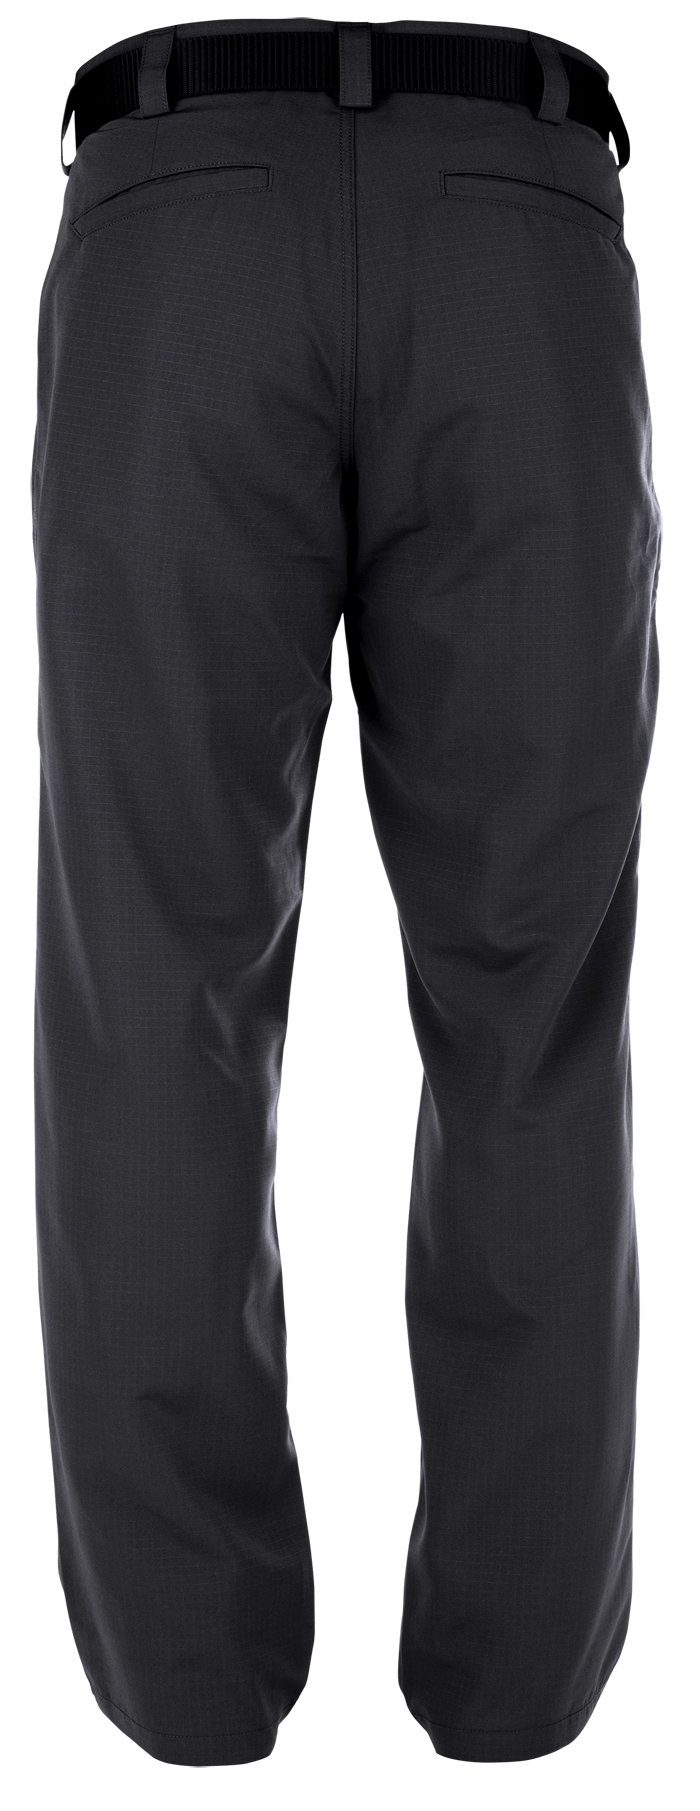 Style 74461L 100% Polyester Fabric 5.11 Tactical Men's Fast-Tac Urban Pants 